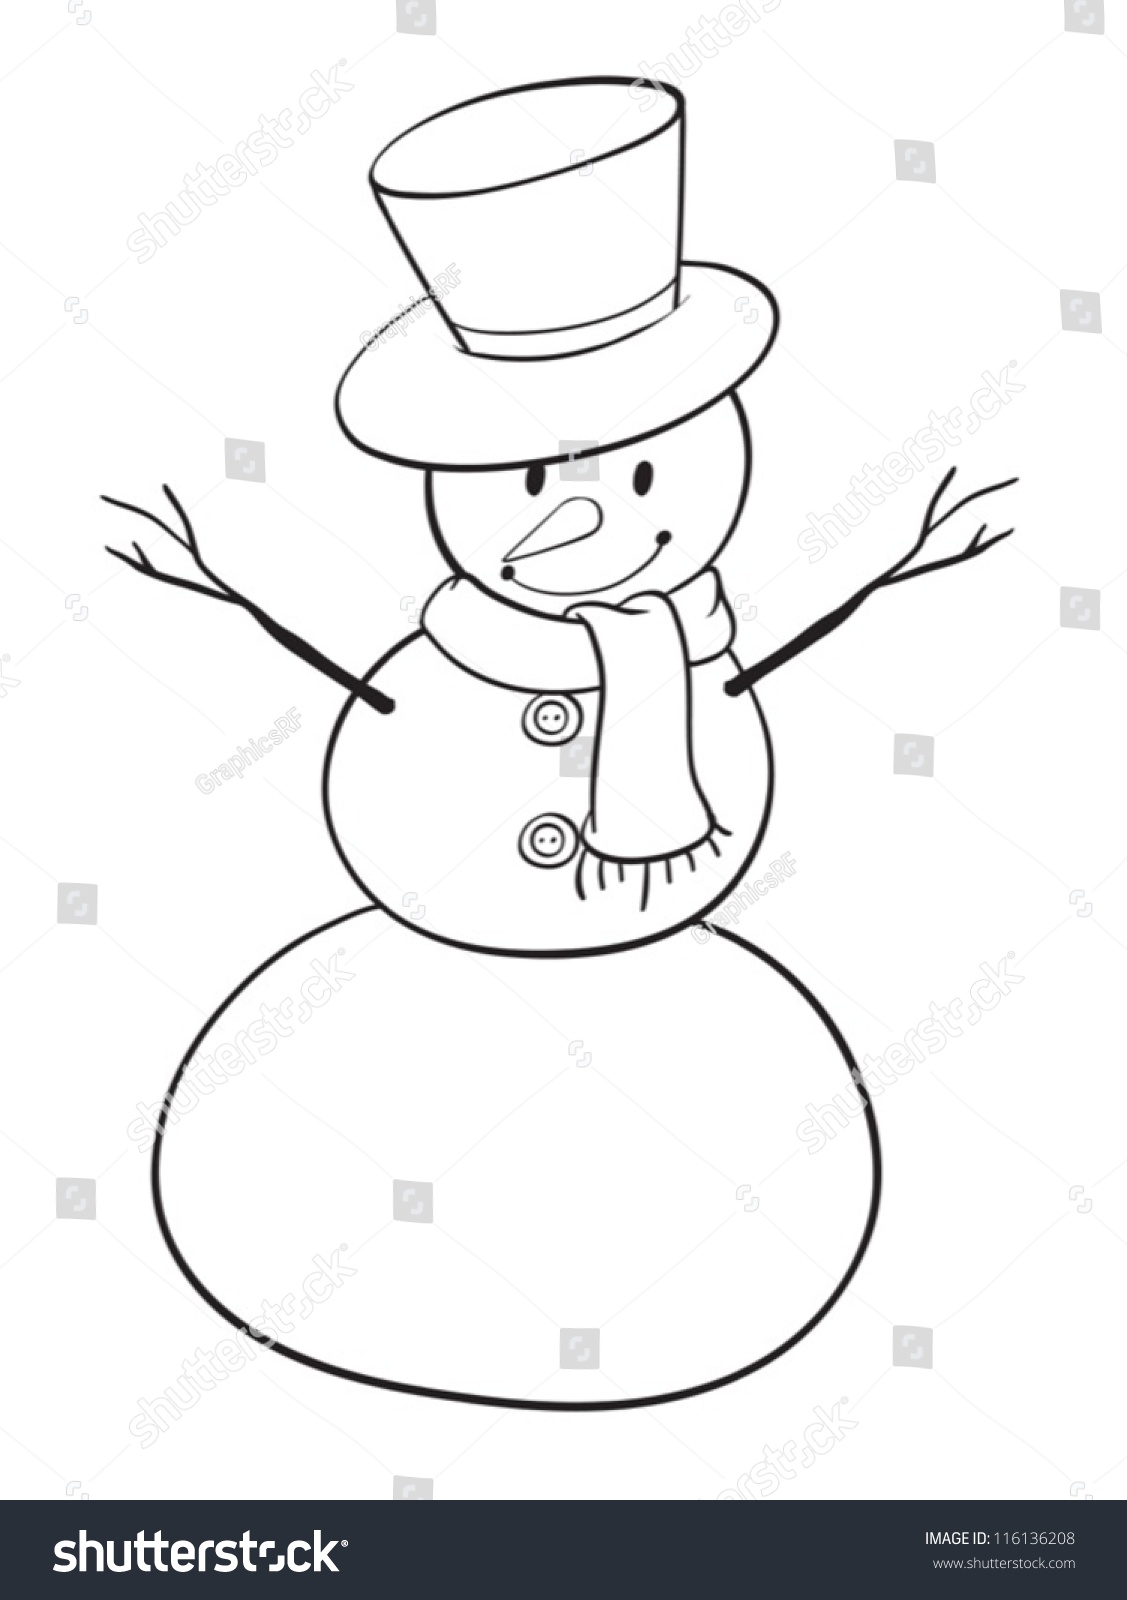 Detailed Illustration Snowman On White Background Stock Vector (Royalty ...